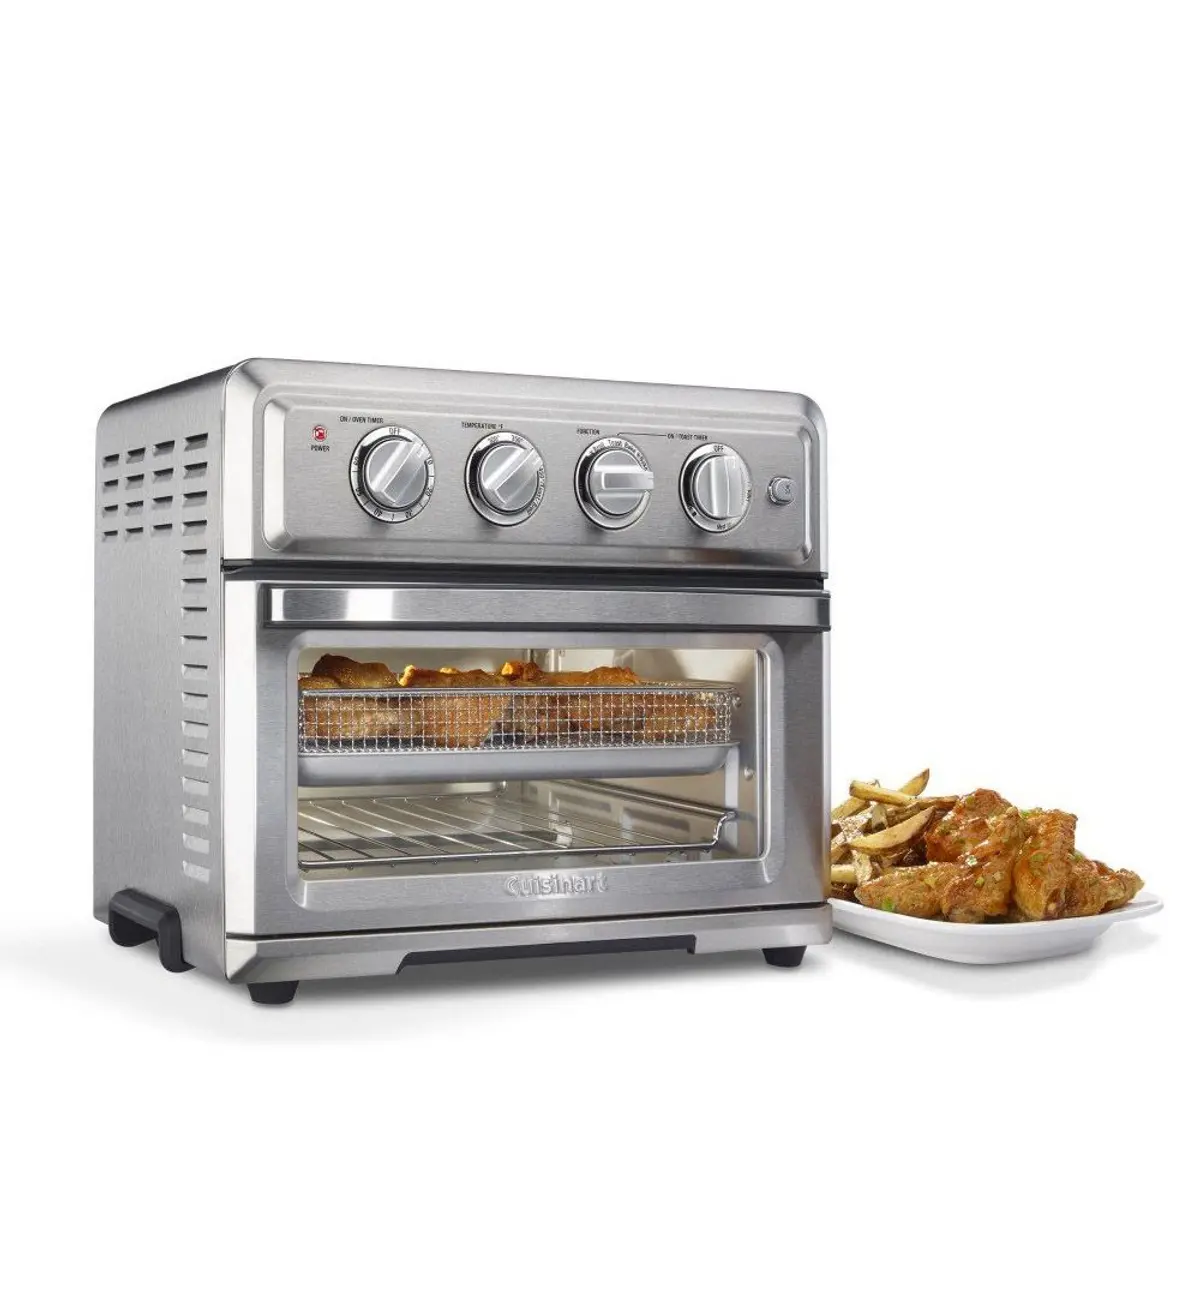 Cuisinart TOA-60 oven review